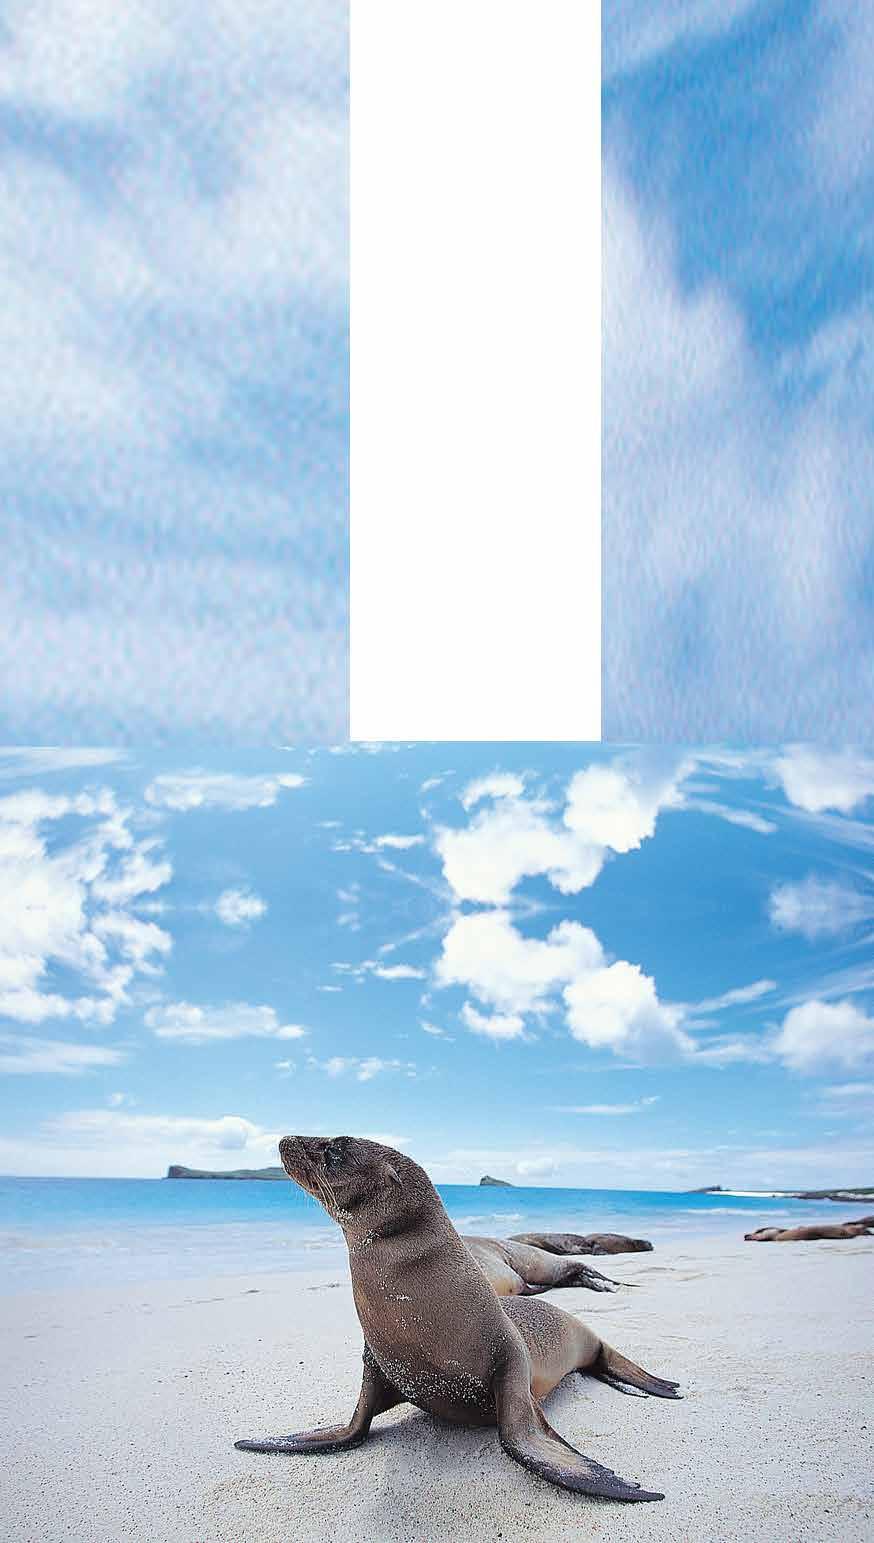 Dear Alumni and Friends, Join fellow alumni and friends as we explore the Galapagos Islands.